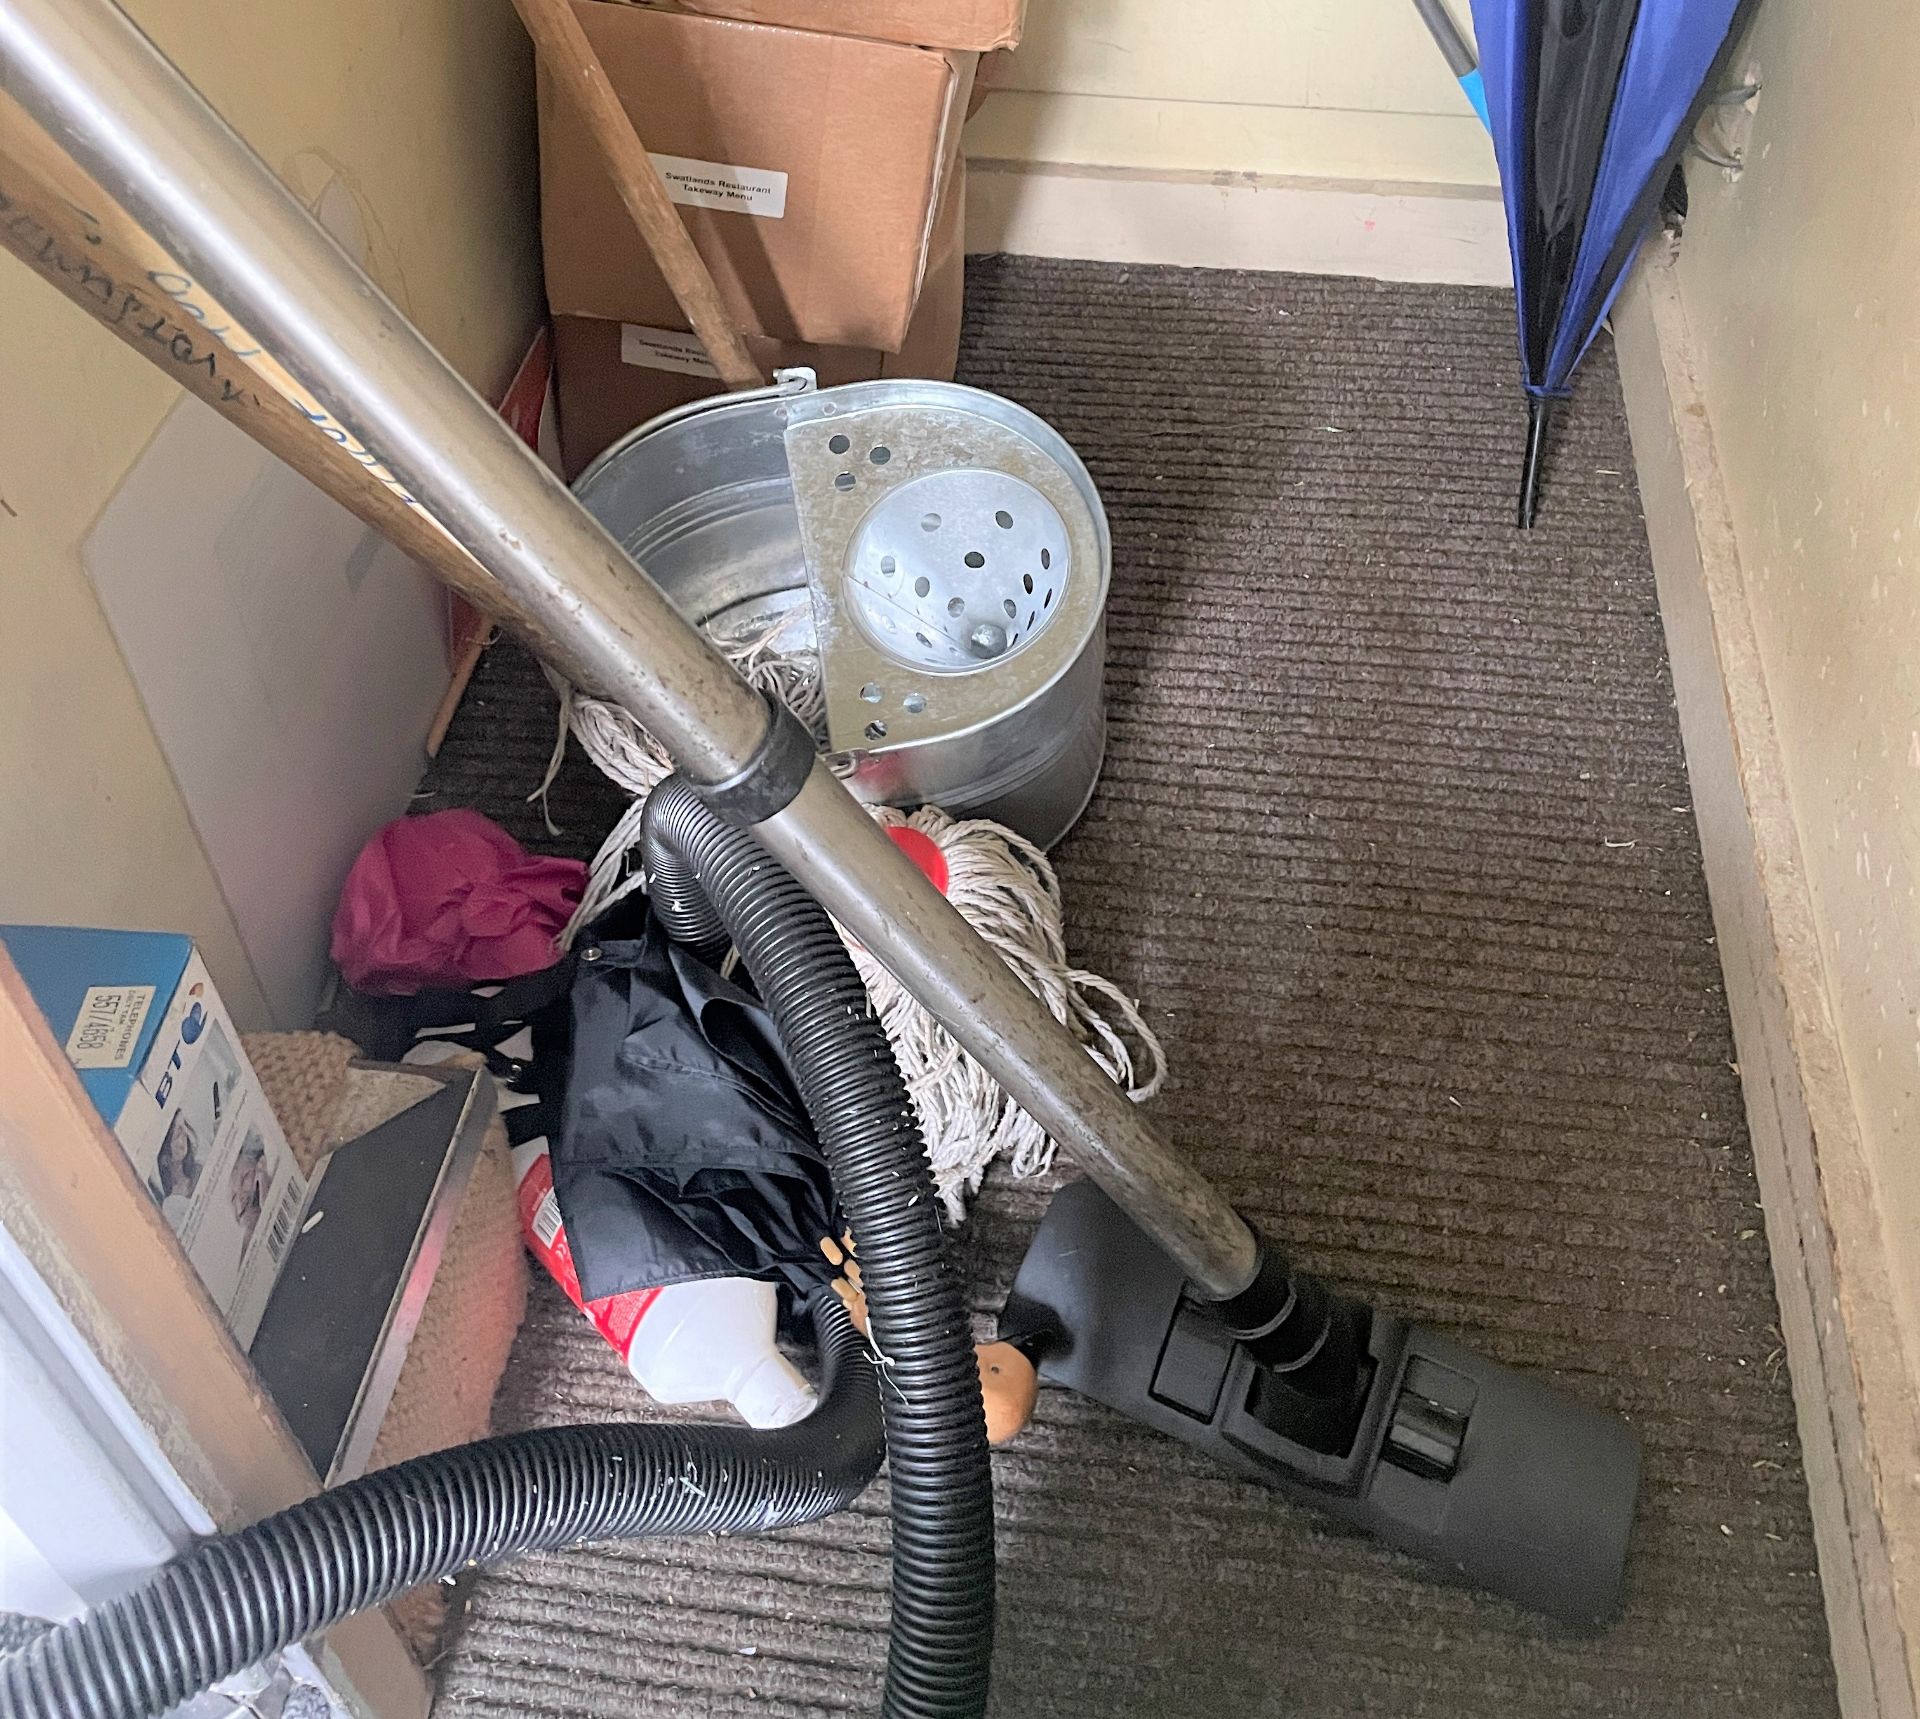 1 x Henry Hoover Pet Vacuum Cleaner With Original Box - Ref: HTYS - CL782 - Location: Leicester, - Image 4 of 5